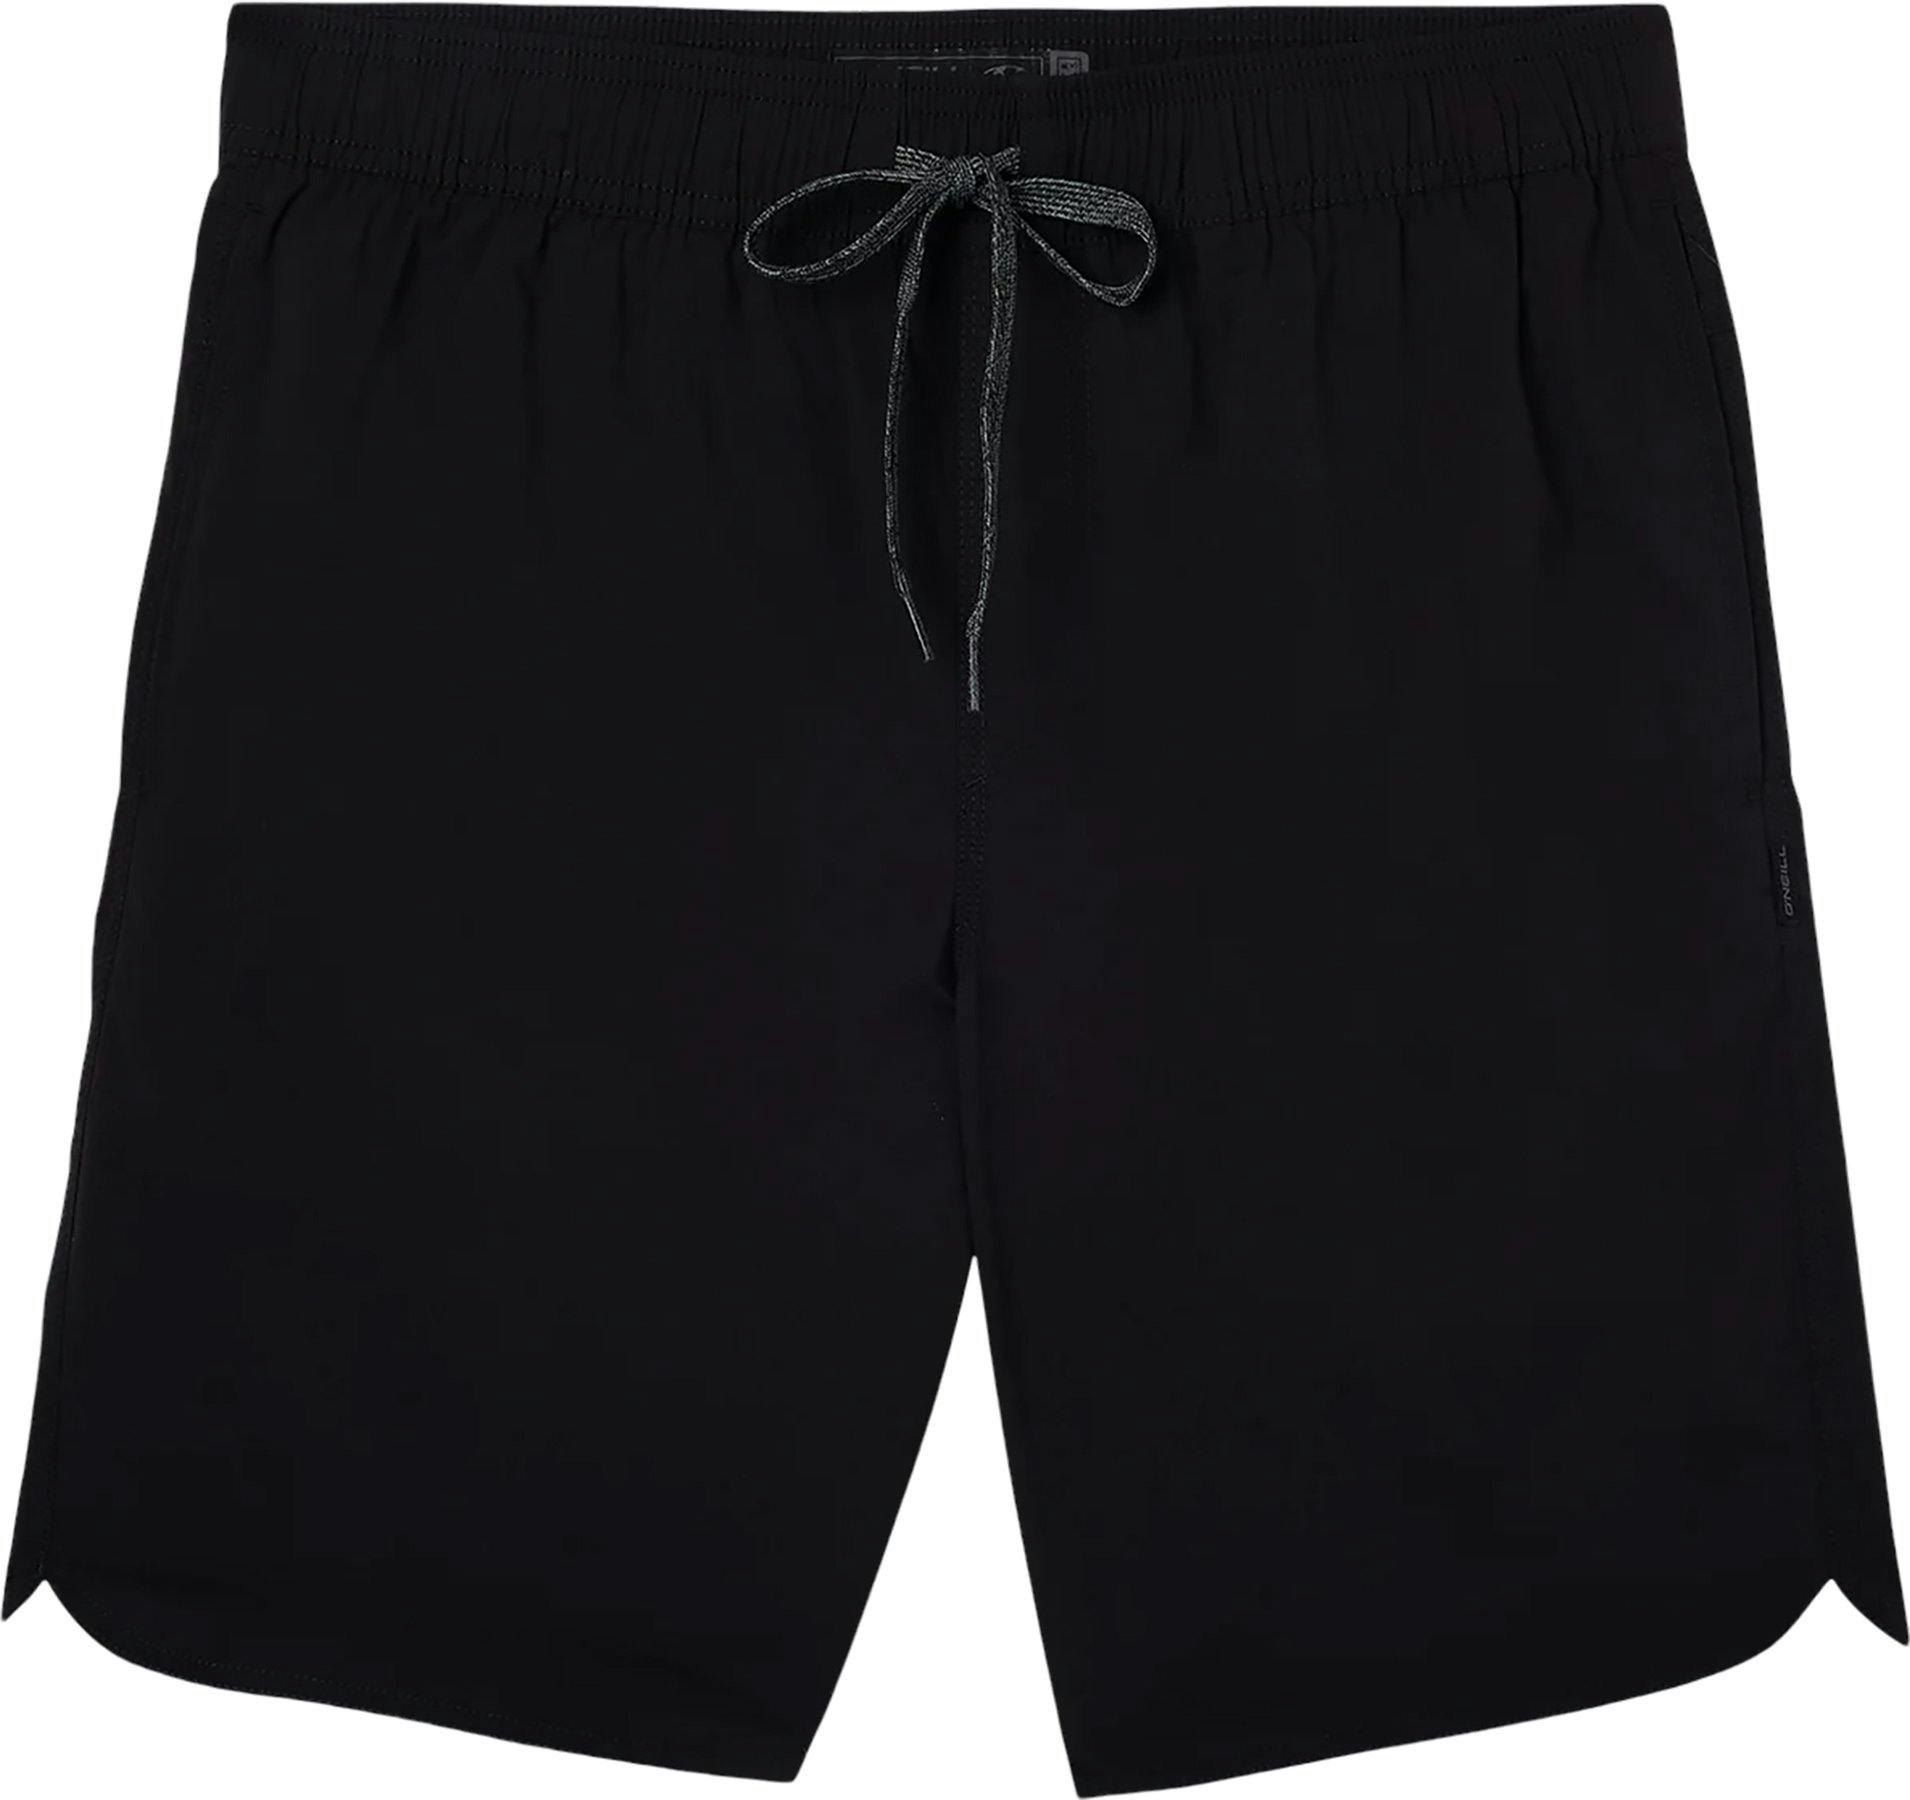 Product image for Trvlr Camino 18 In Boardshorts - Men's